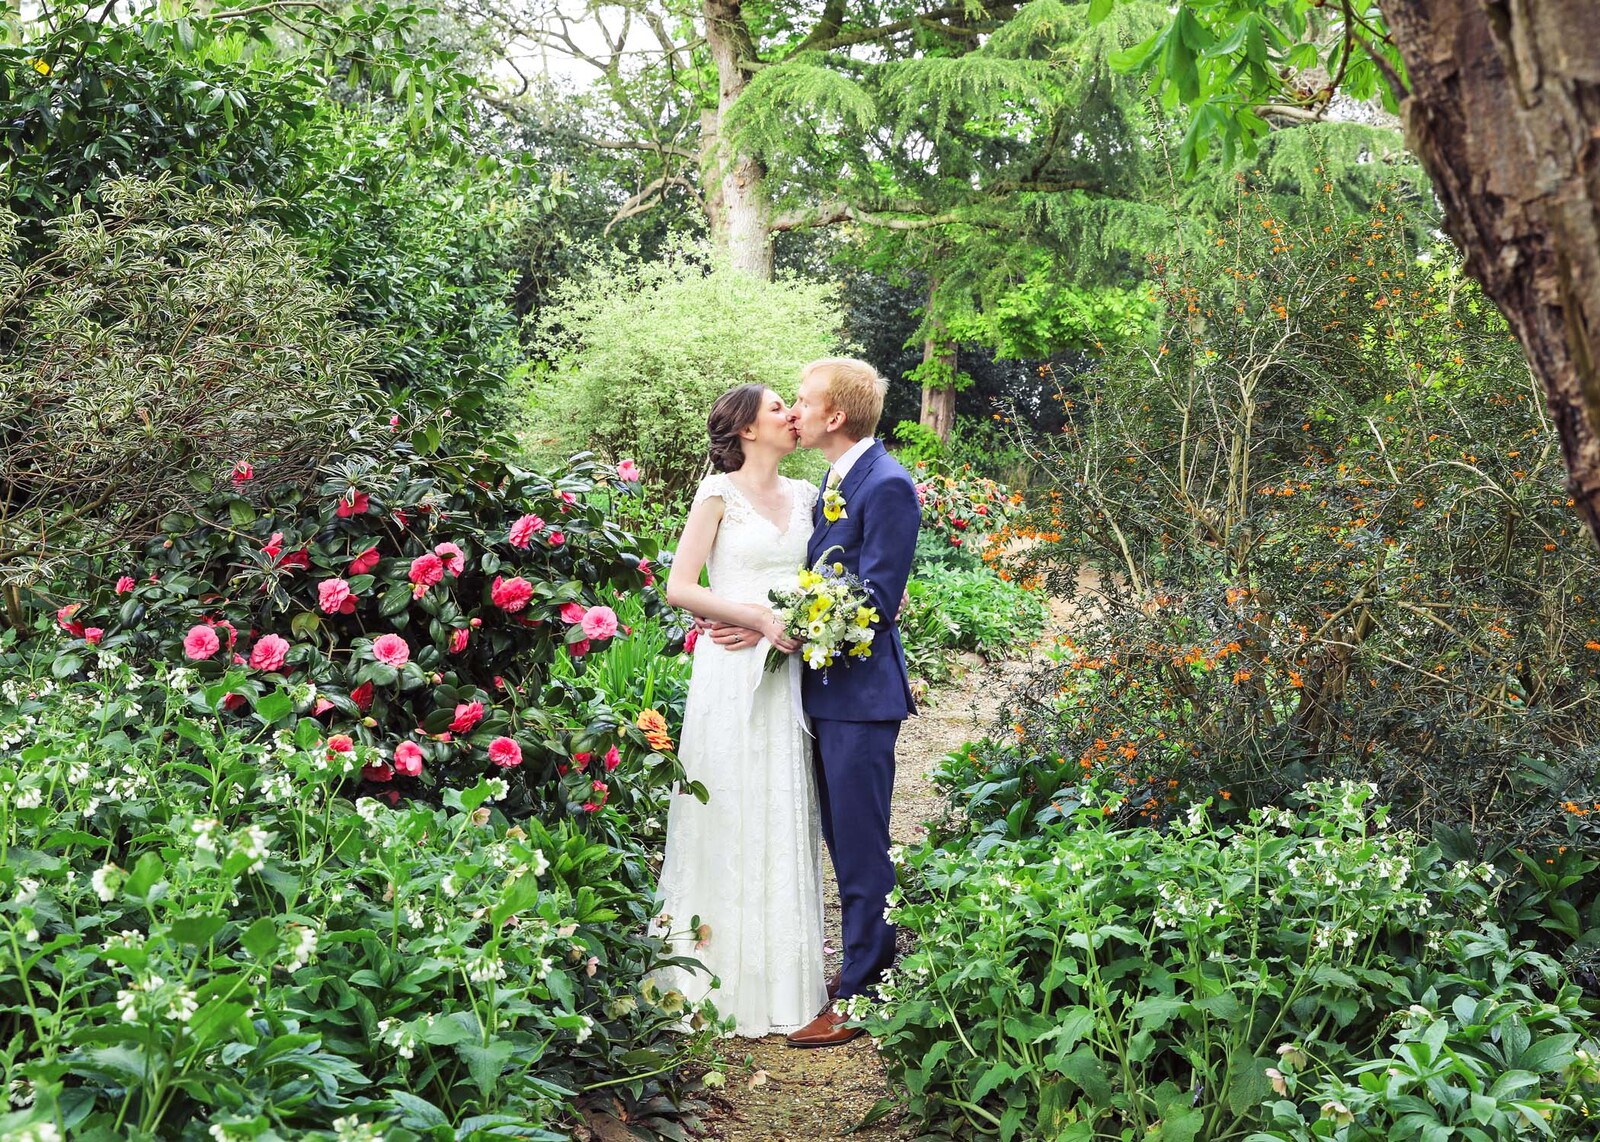 A bride and groom kissing in the woodland copse in spring on their wedding day at Haughley Park Barn Wedding Venue captured by Suffolk Wedding Photographers Hayley Denston Photography